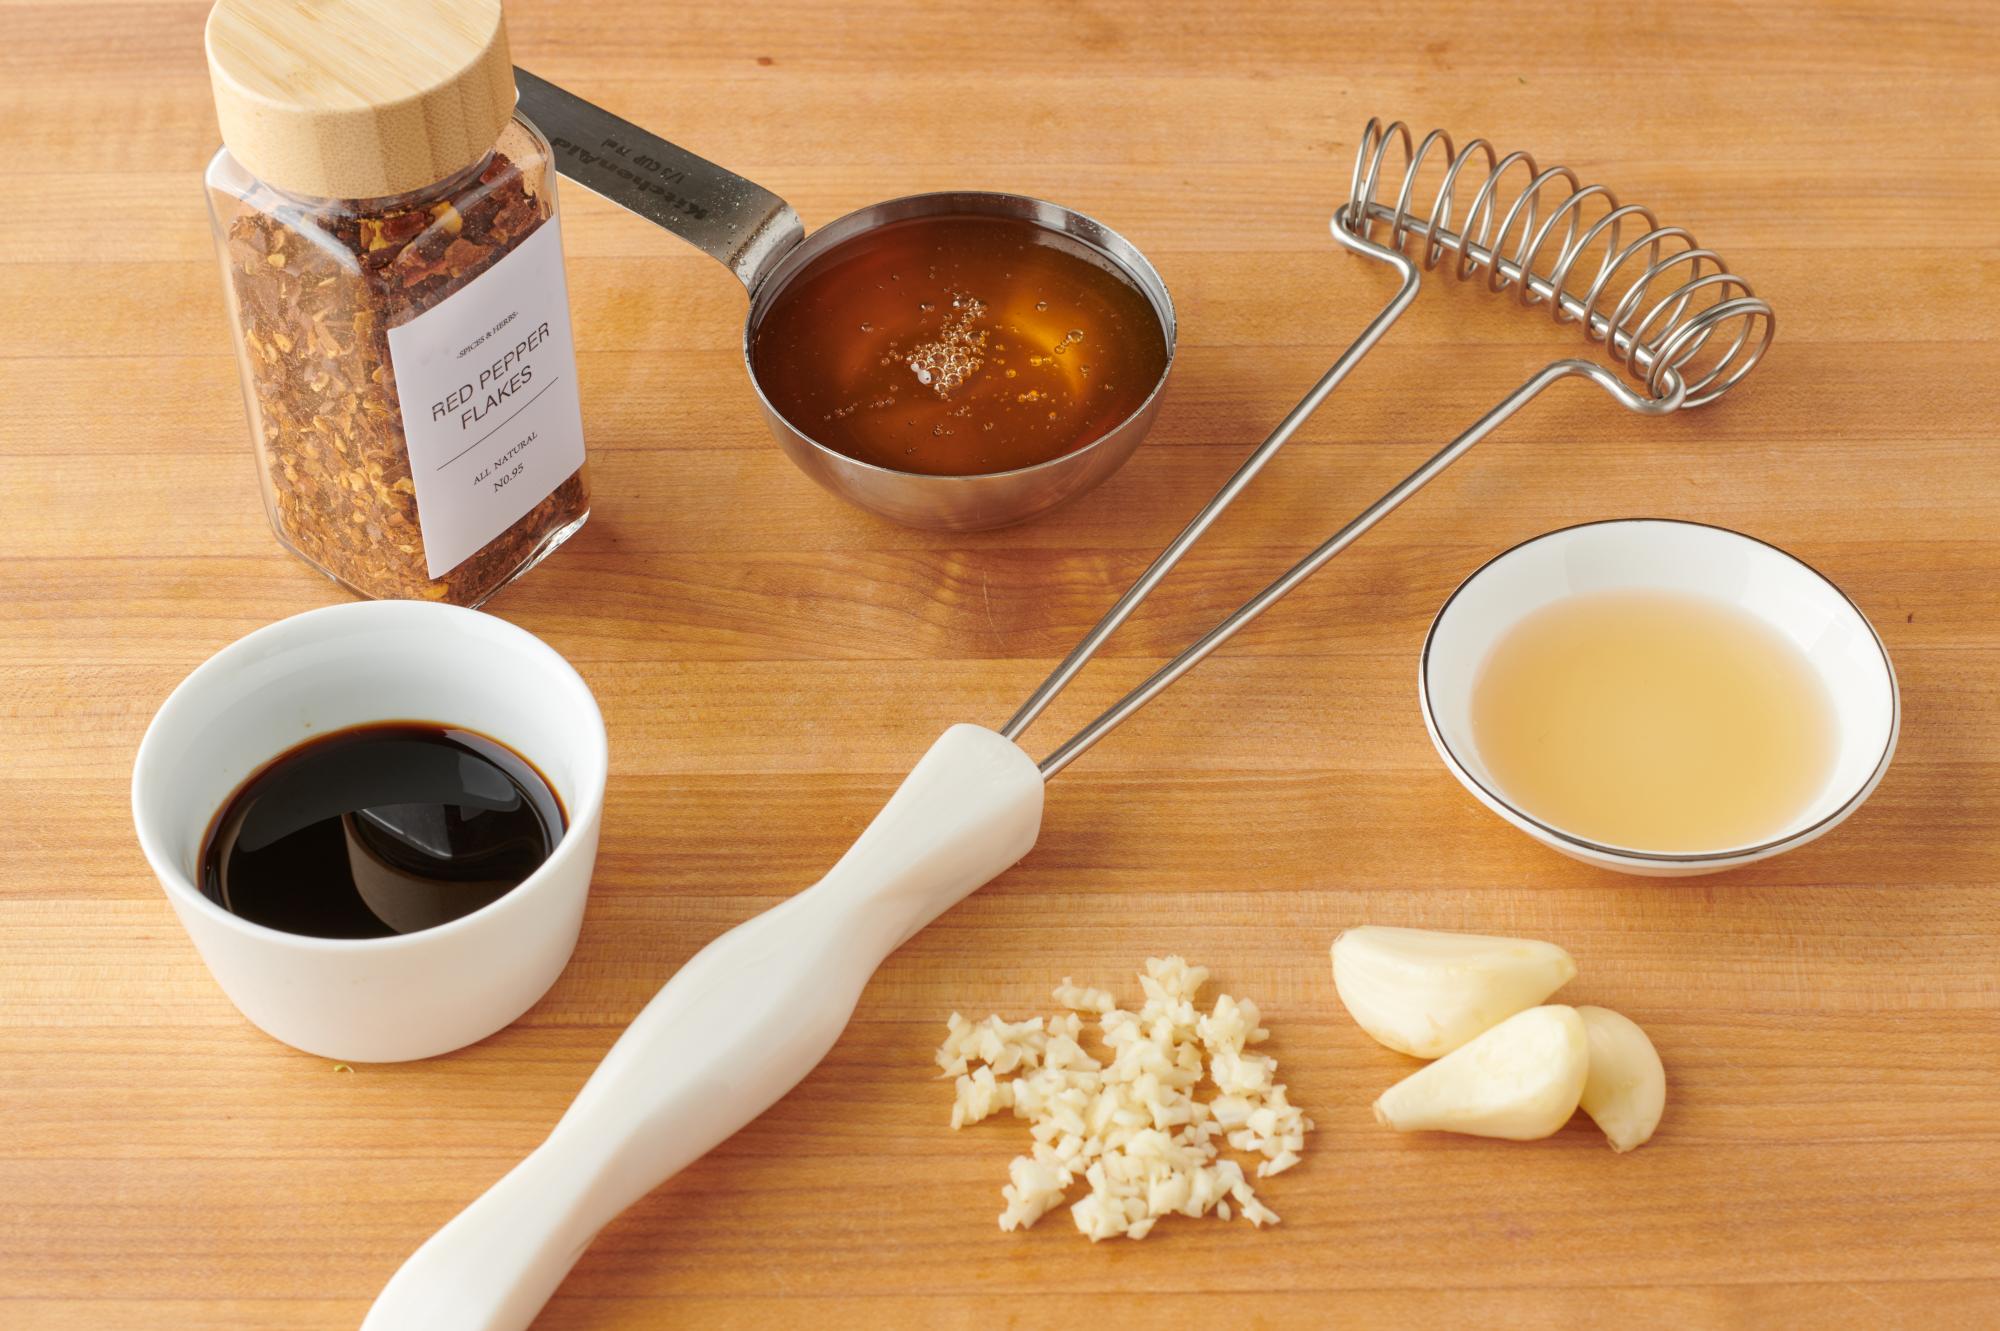 Ingredients with a Mix-Stir.